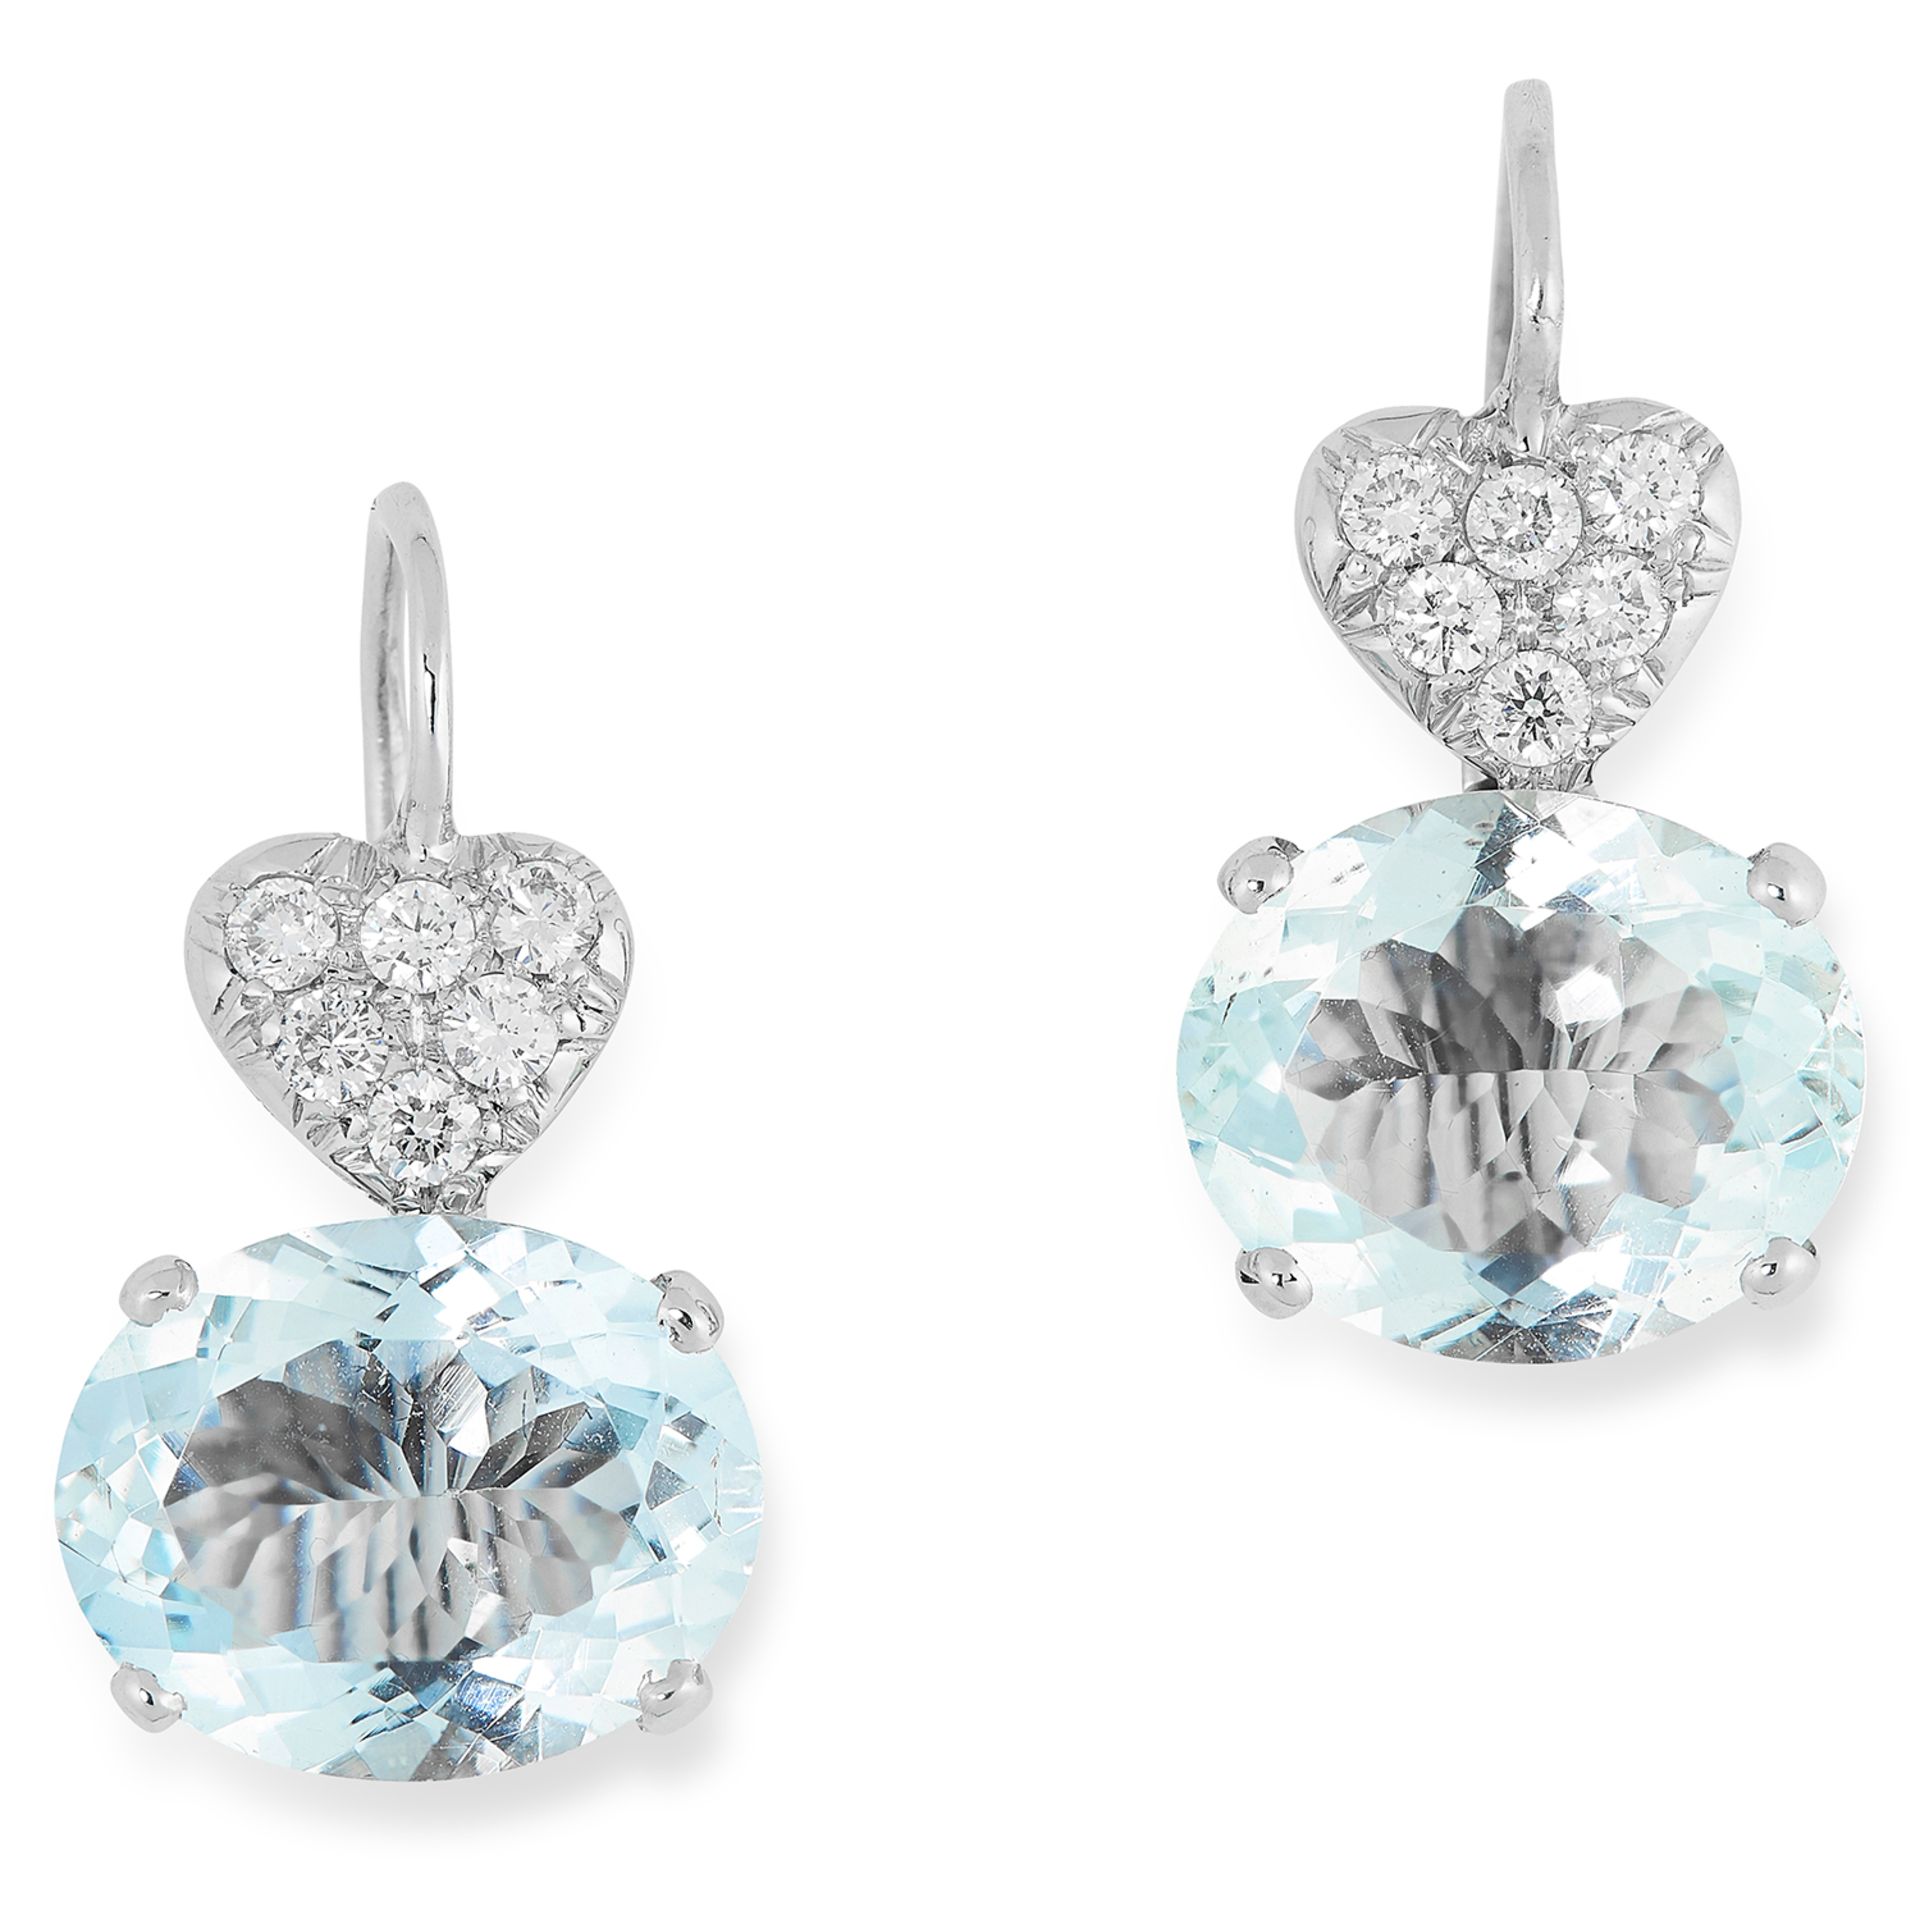 PAIR OF AQUAMARINE AND DIAMOND EARRINGS each set with round cut diamonds above an oval cut